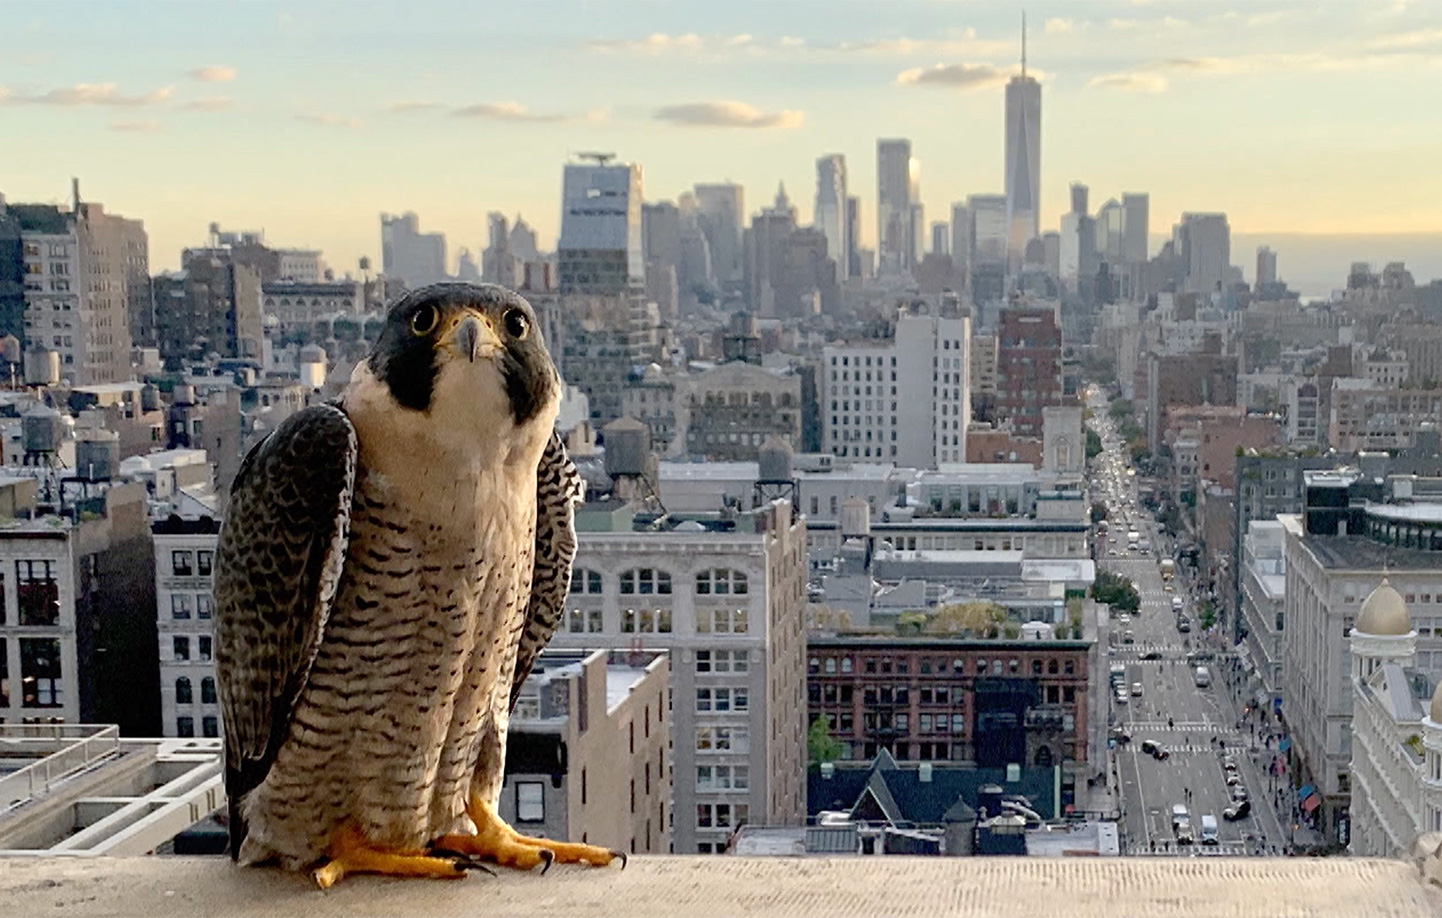 Photo of a peregrine falcon in NYC
                                           